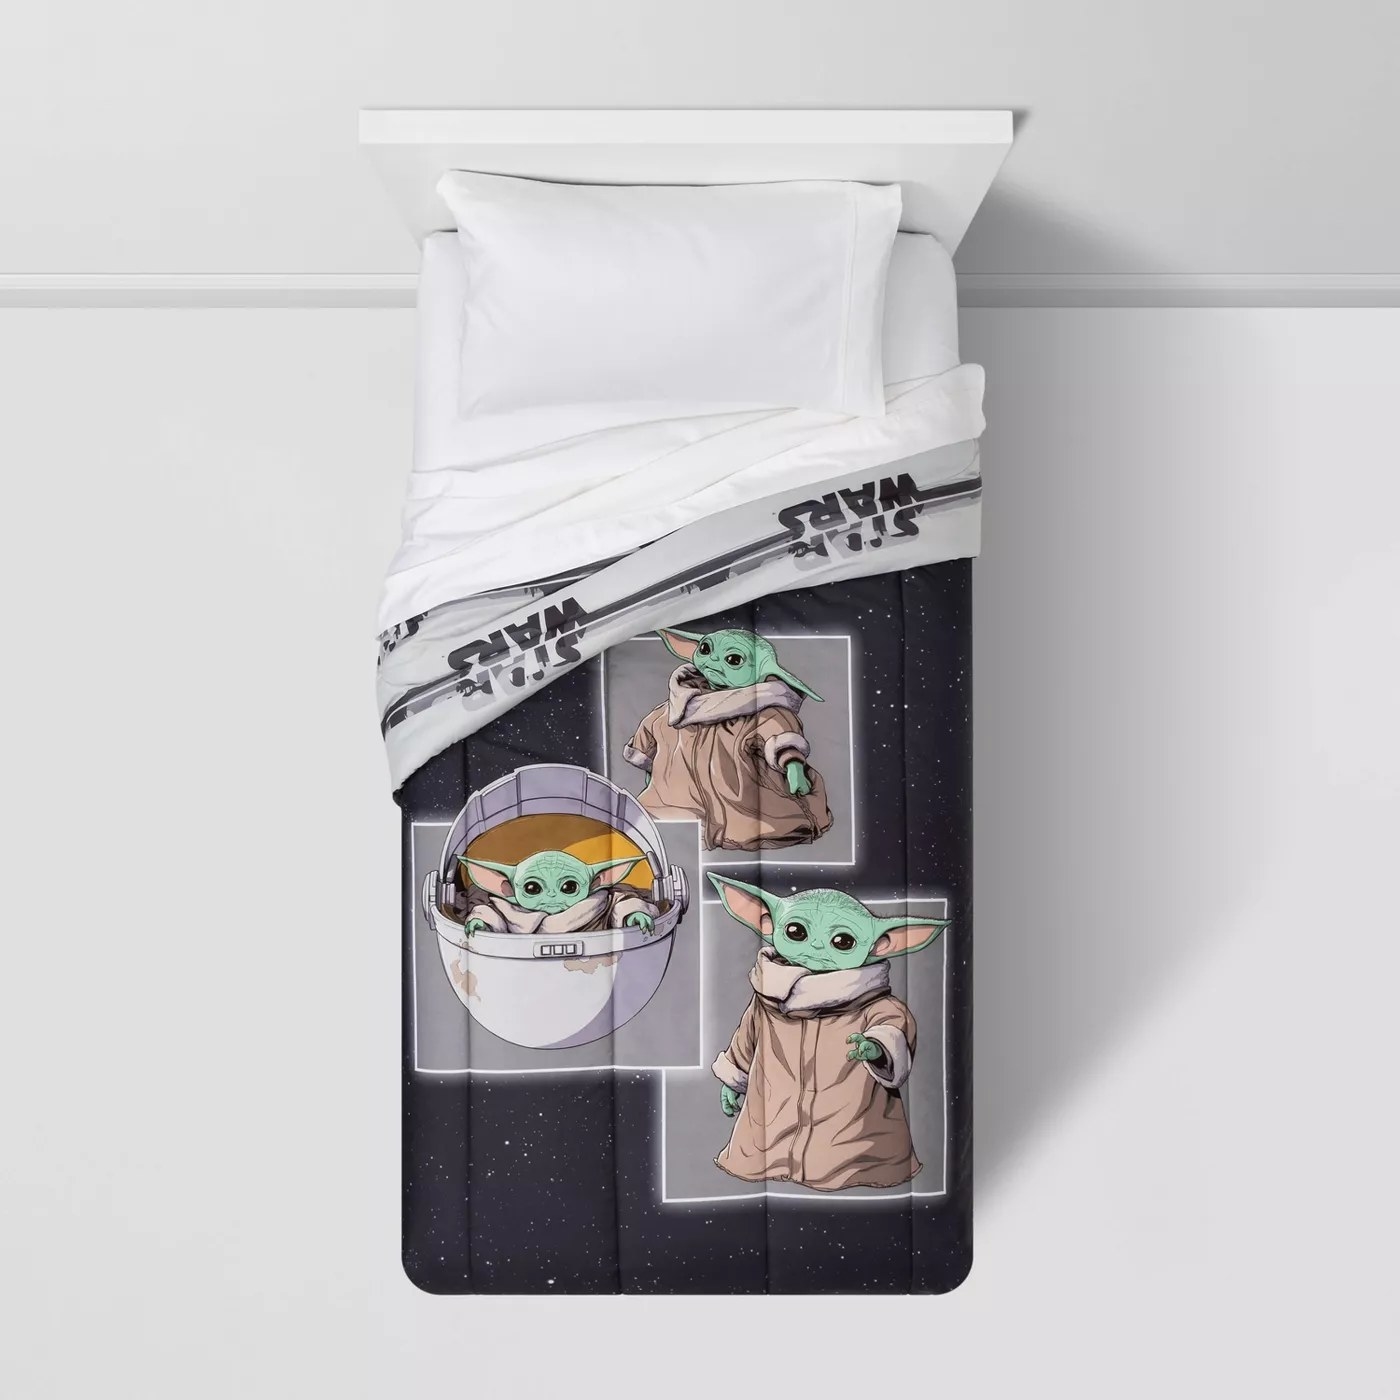 The Star Wars themed twin comforter